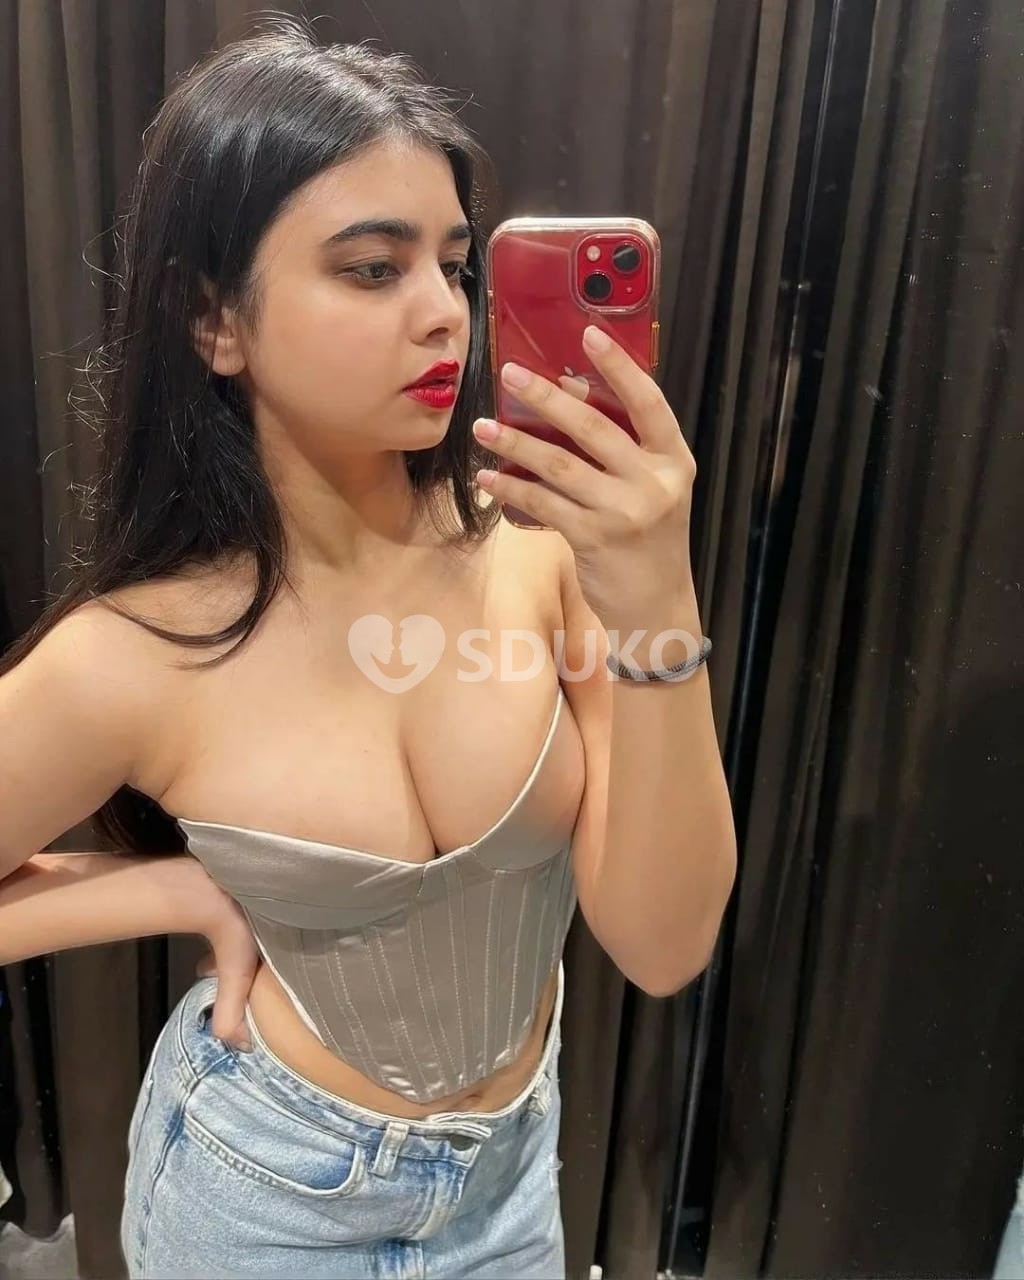 CHEMBUR 💥 ESCORT INDEPENDENT-CALL GIRLS AVAILABLE WITH PLACE CHEAP RATE. .,,,,,,,₹+₹+₹!"